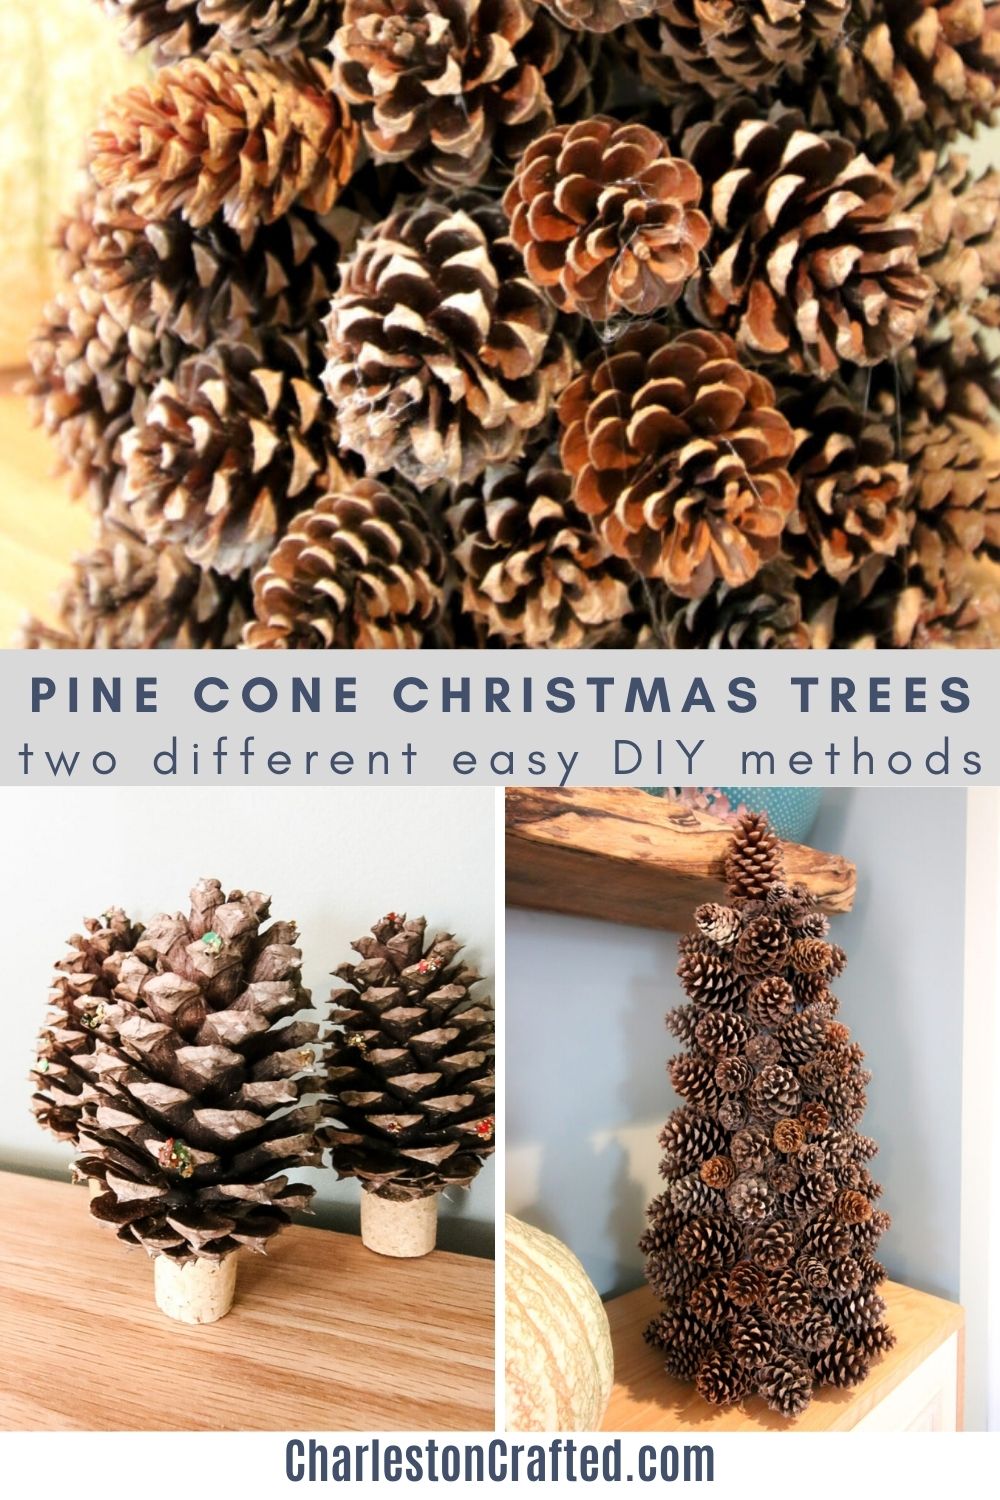 17 Christmas decoration ideas with pine cones 